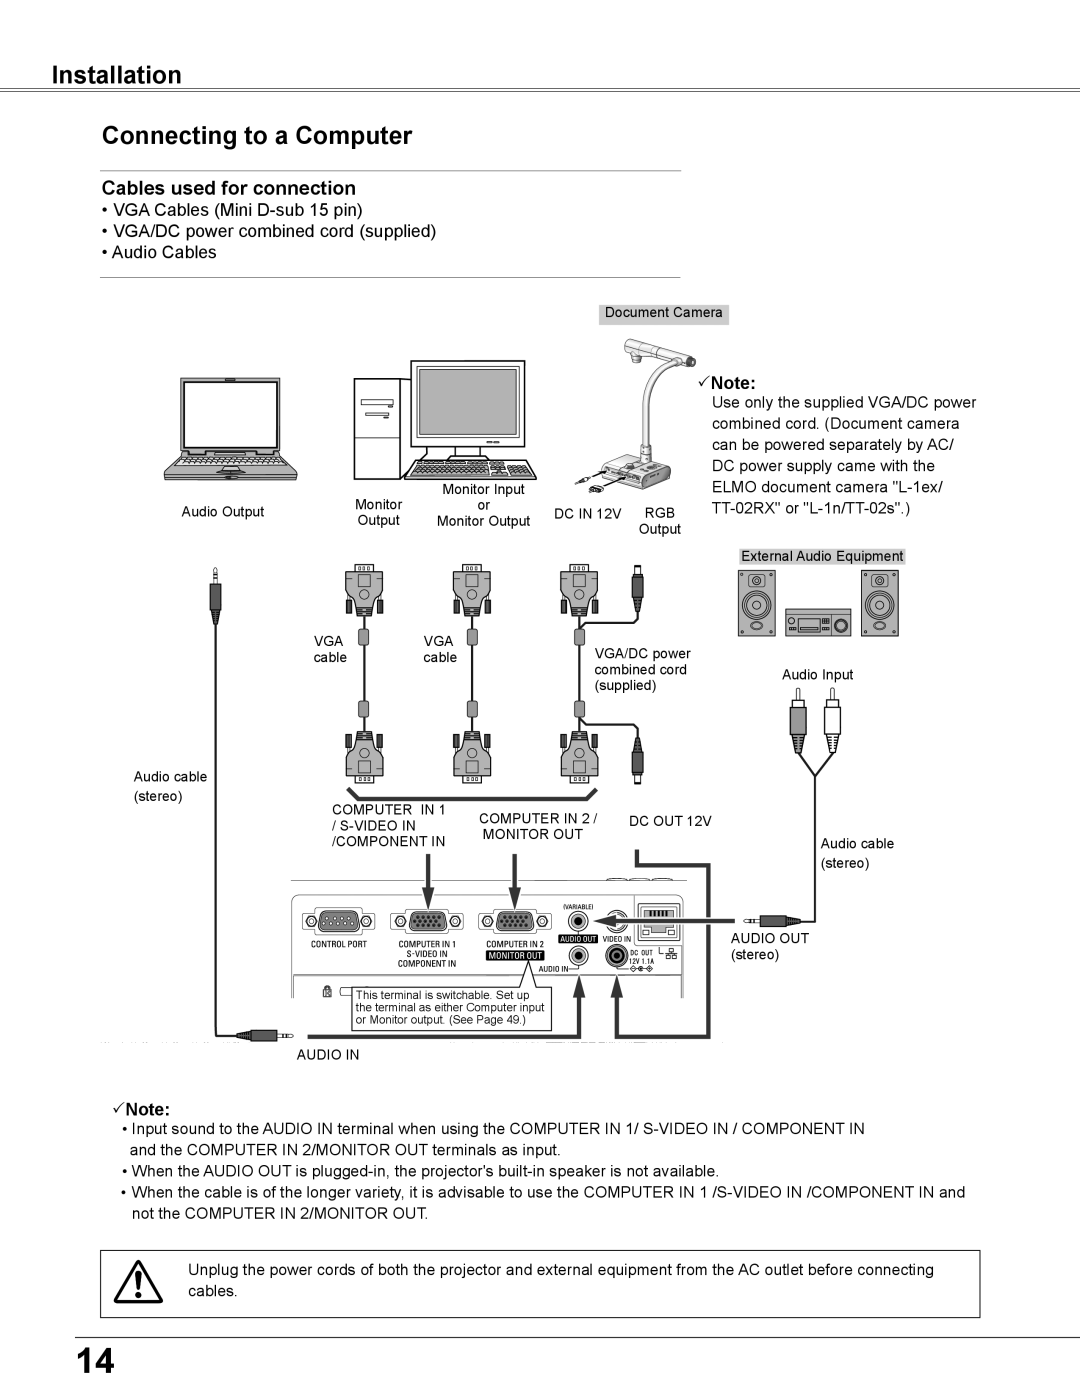 Elmo CRP-26 owner manual Installation Connecting to a Computer, Cables used for connection, Note 